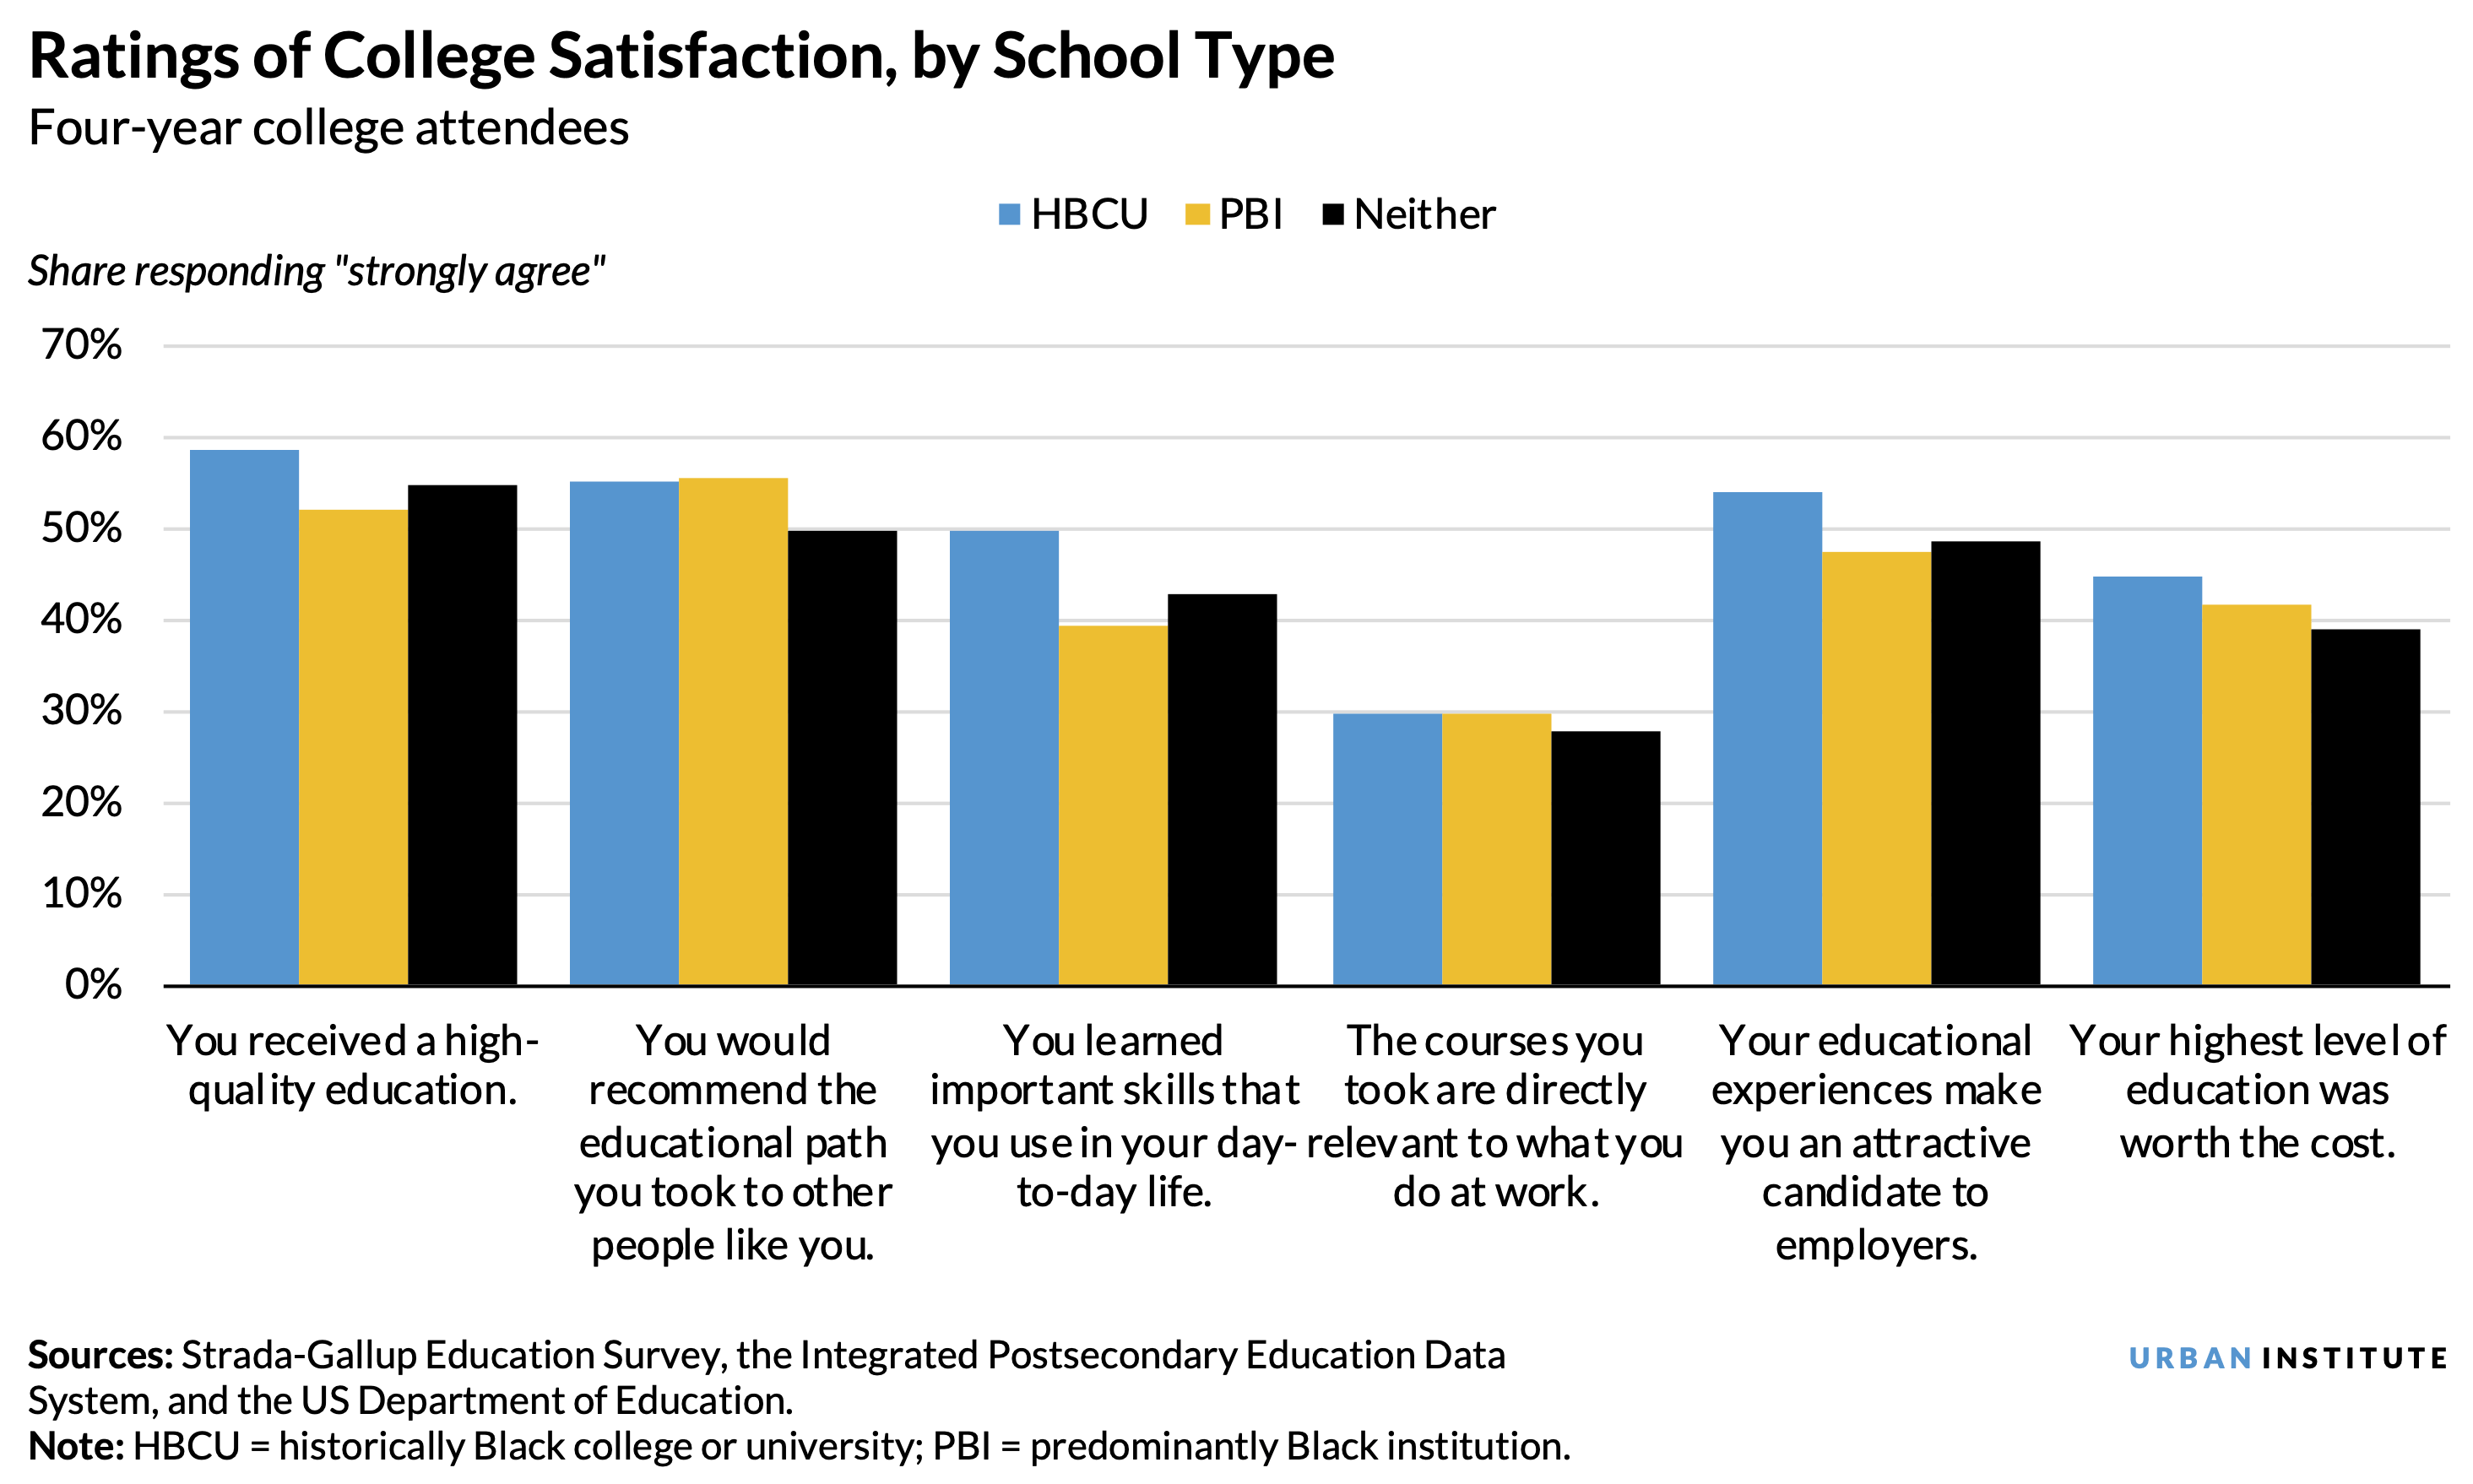 A vertical bar chart showing ratings of college satisfaction, comparing students who attended historically Black colleges and universities, predominantly Black institutions, and other institutions.